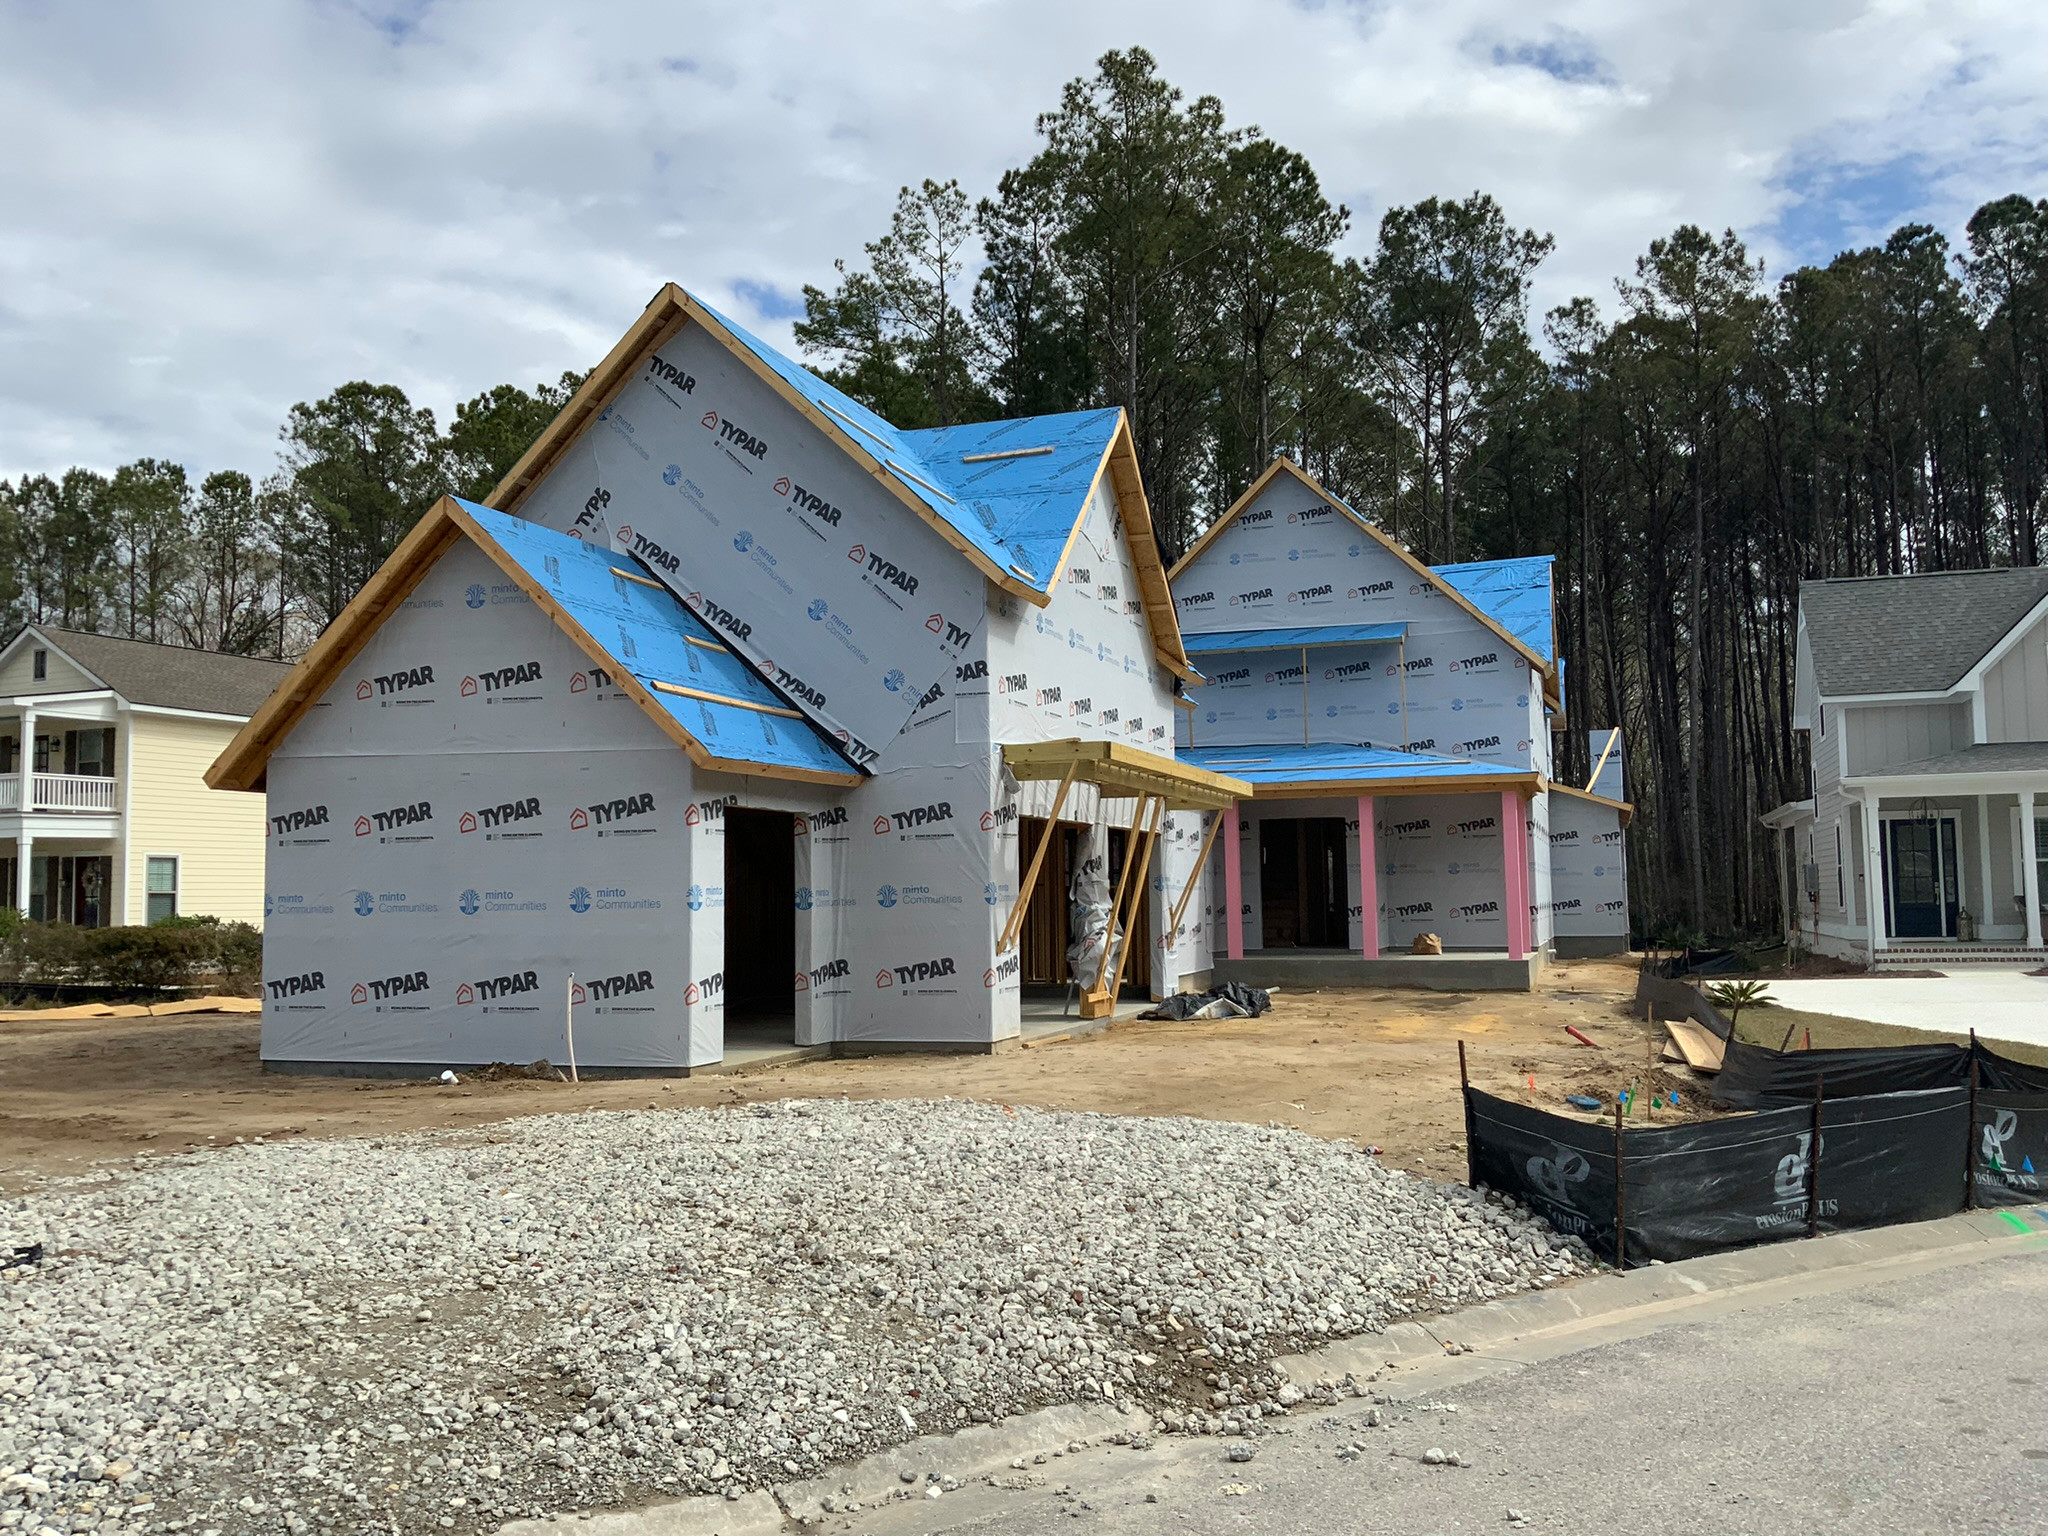 26 Blue Trail Court - Private Residence - In Progress